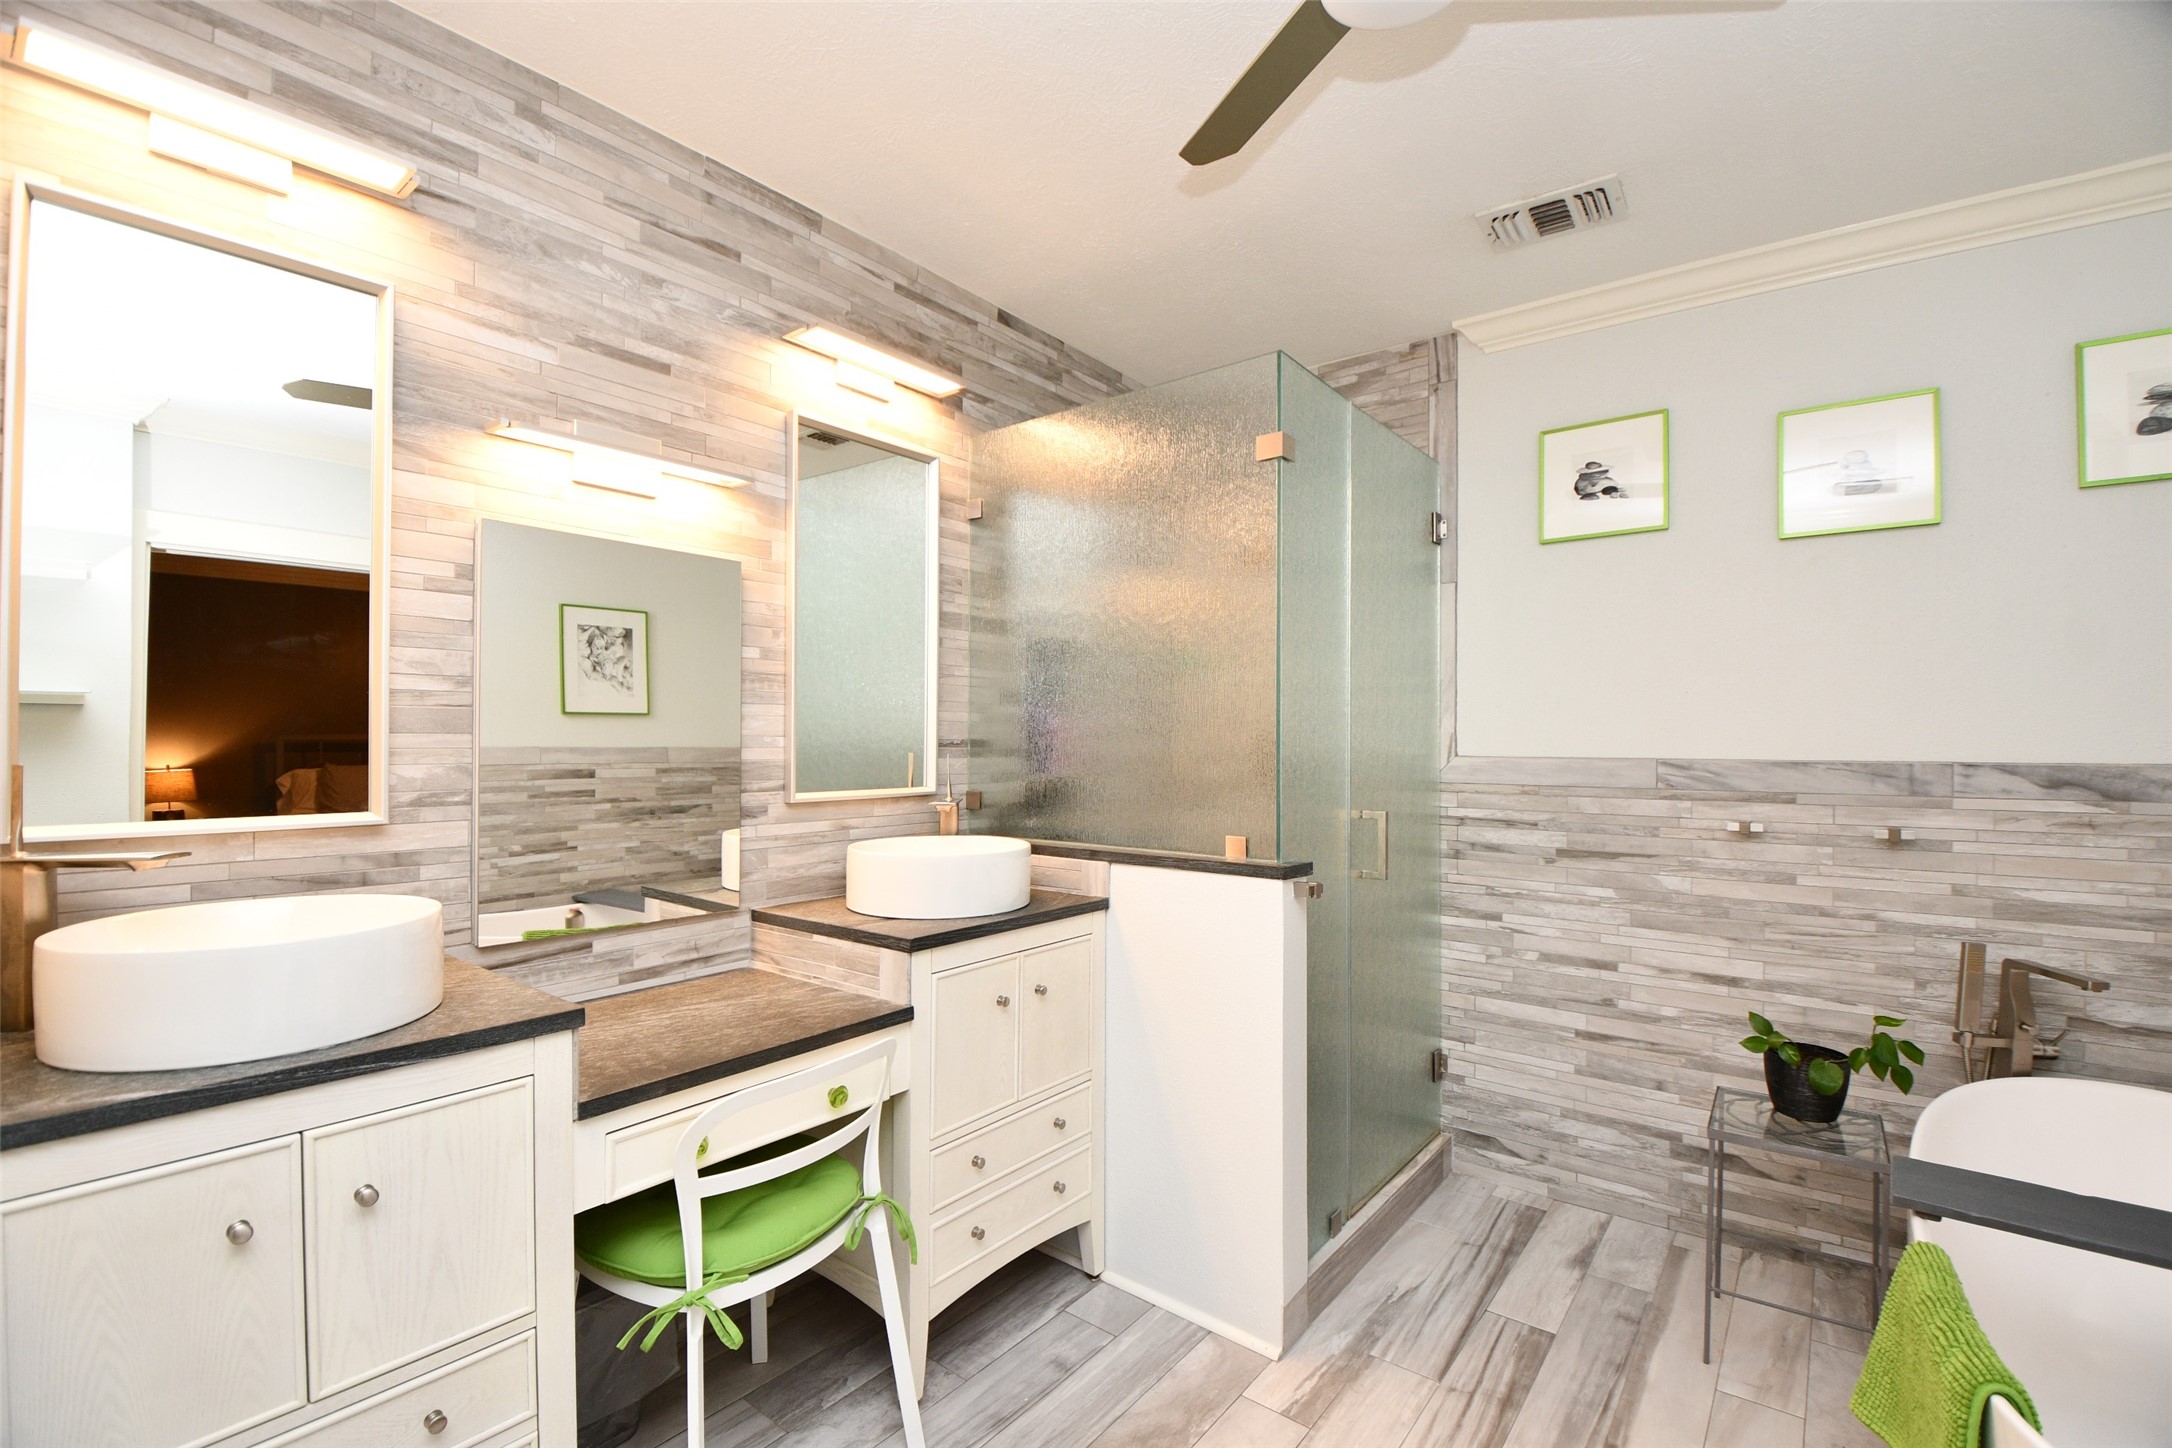 The luxurious primary bath features dual sinks, vanity, stand up shower and separate soaking tub.